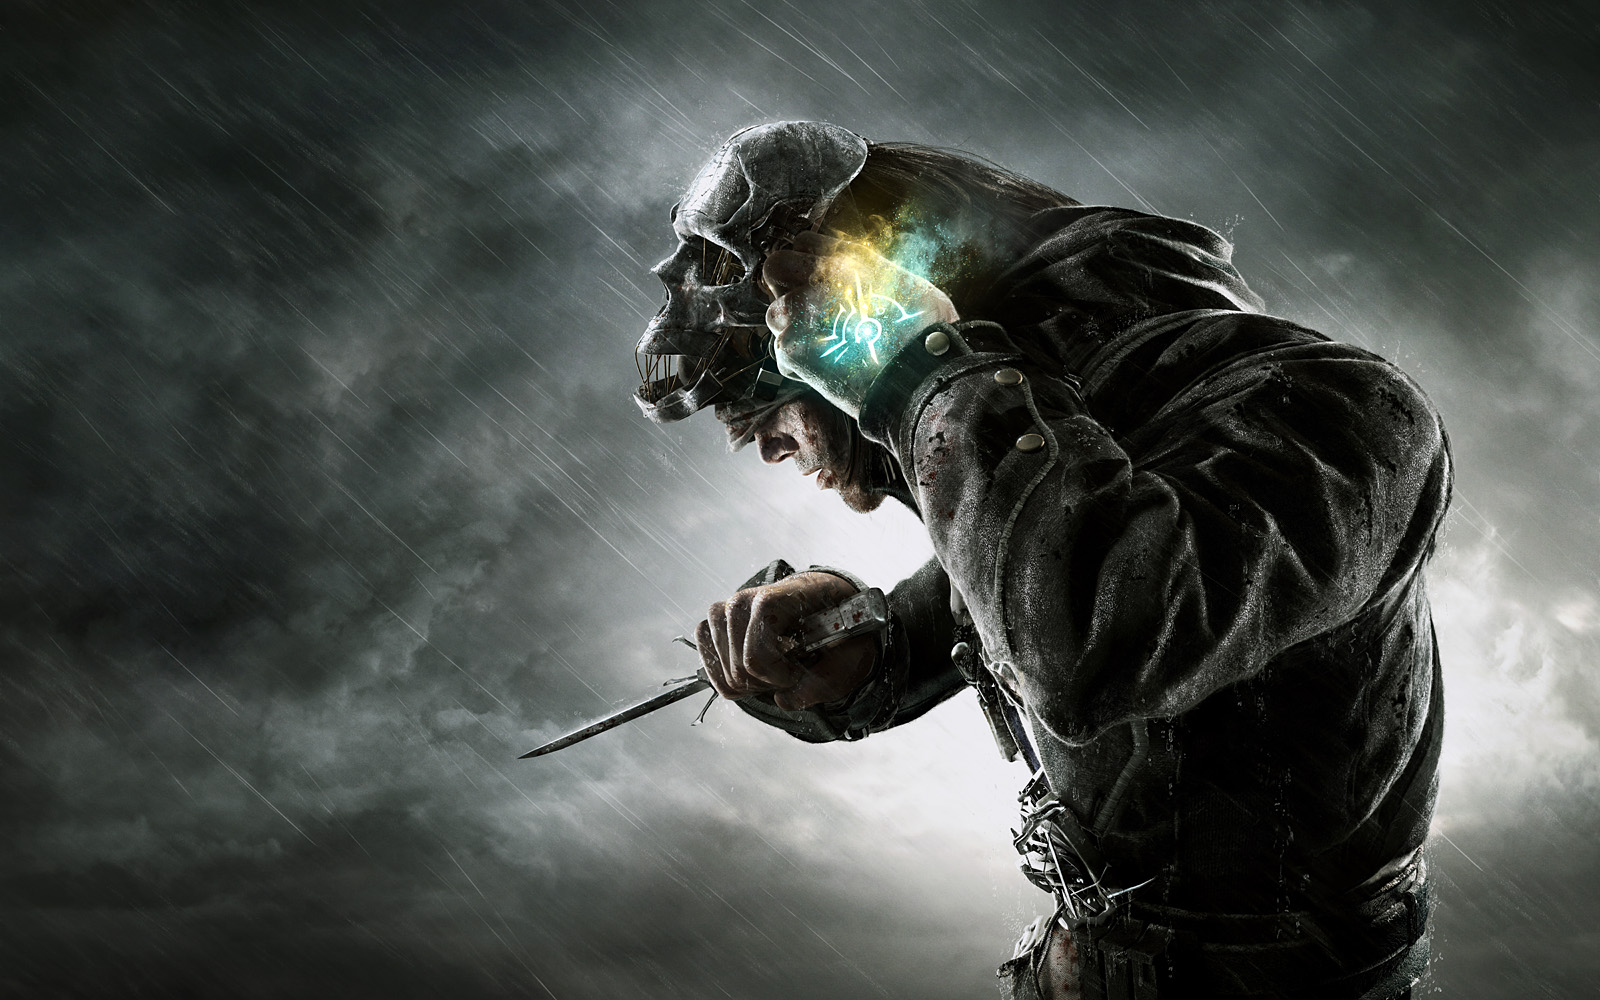 Dishonored Soundtrack Featured Screenshot #1